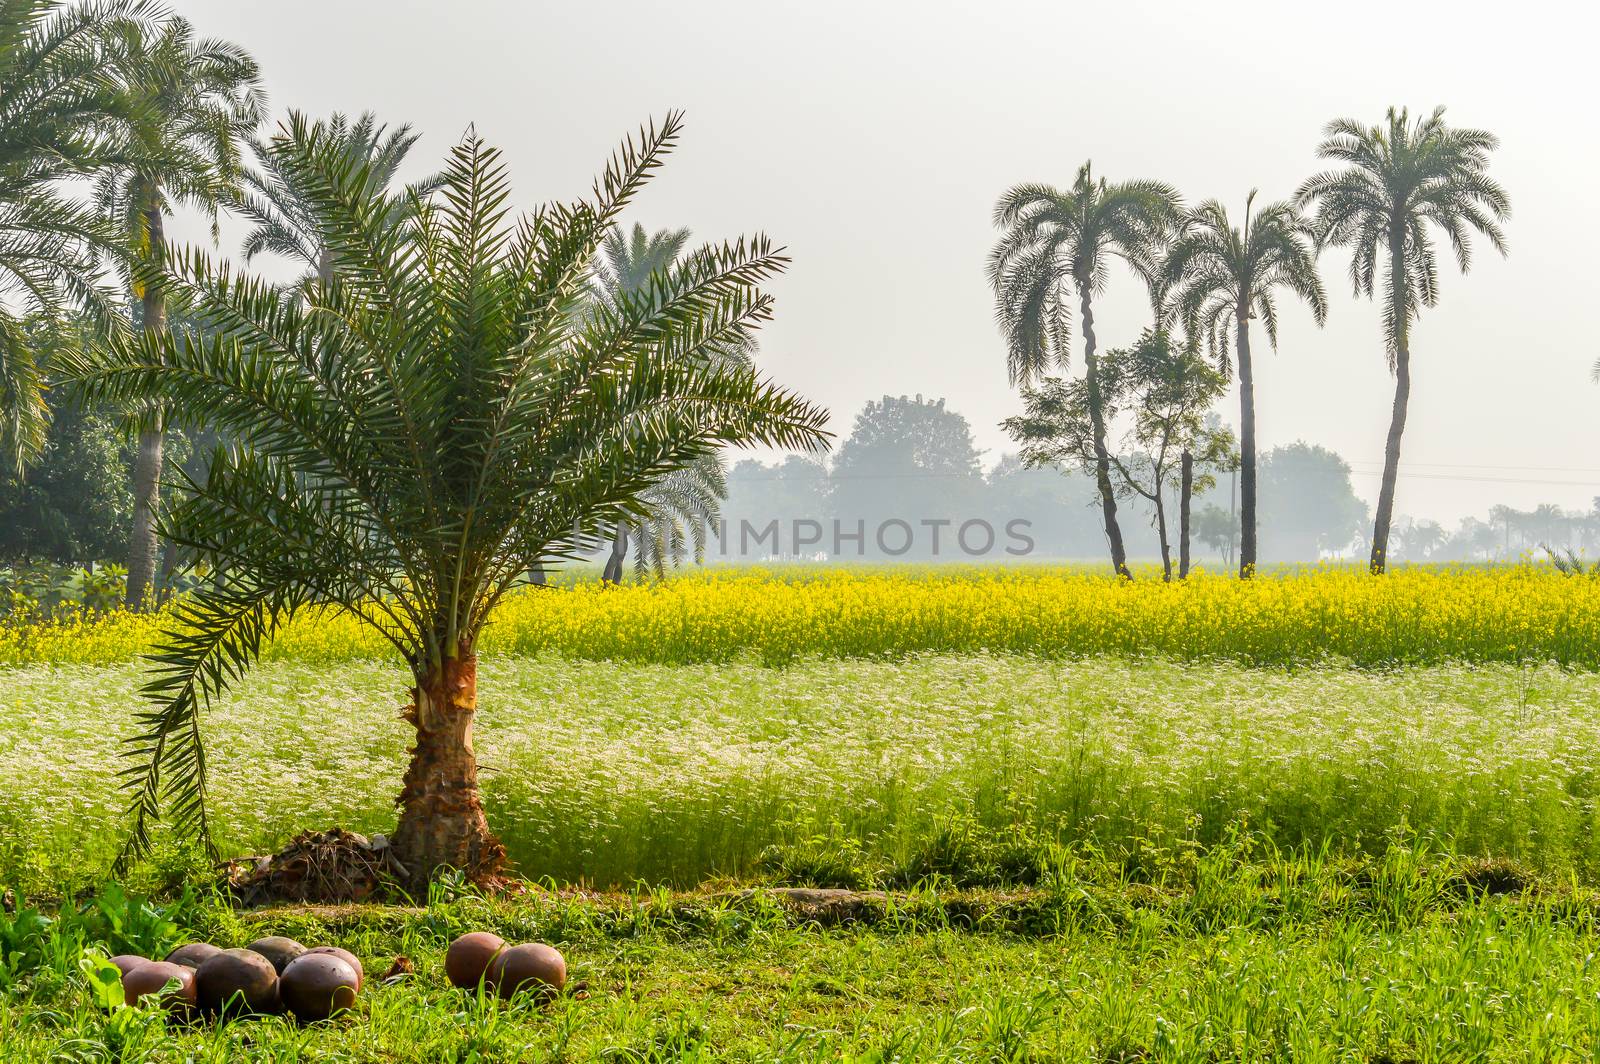 This is a photograph of dates tree and dates pot (used for juice storage) captured from an agricultural field near Kolkata india. The image taken at daytime on a sunny day. The Subject of the image is to show a dates cultivation and dates storage procedure. This photography is taken in as landscape style. This photograph may be used as background, wallpaper, screen saver in agricultural industry.